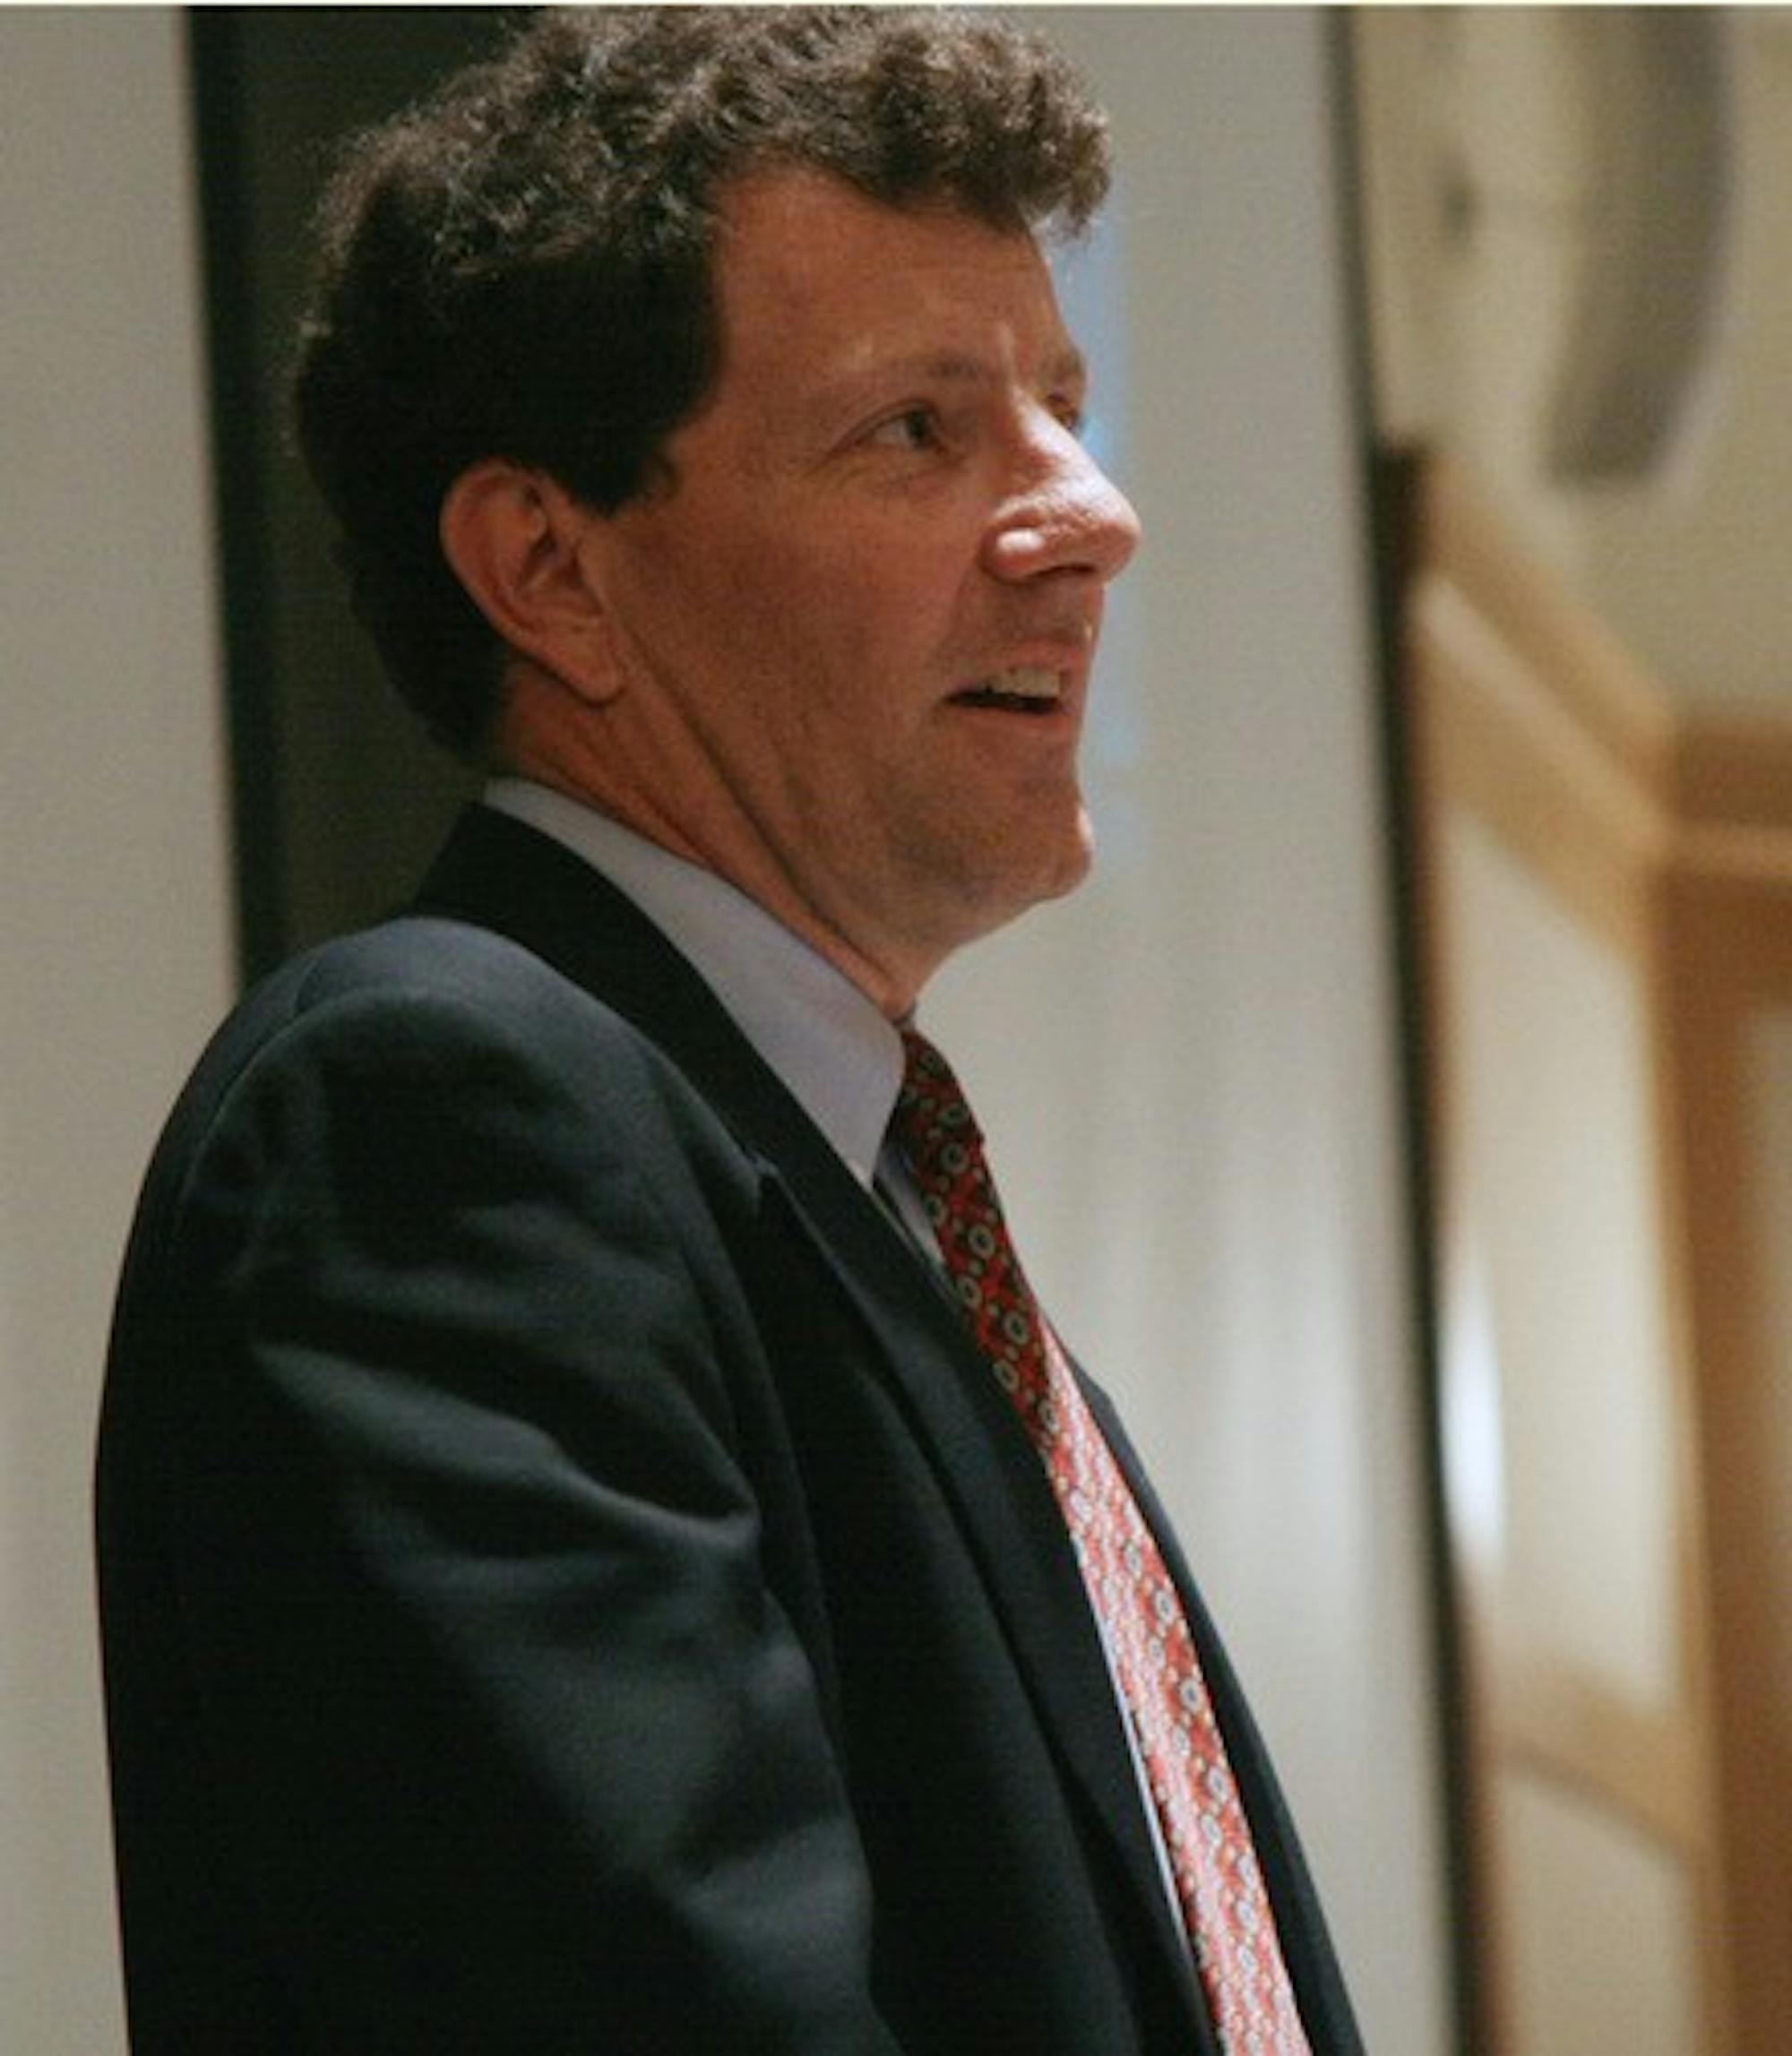 Pulitzer Prize winner and New York Times columnist Nicholas Kristof relates his first-hand experiences in the Darfur region of the Sudan Tuesday afternoon.